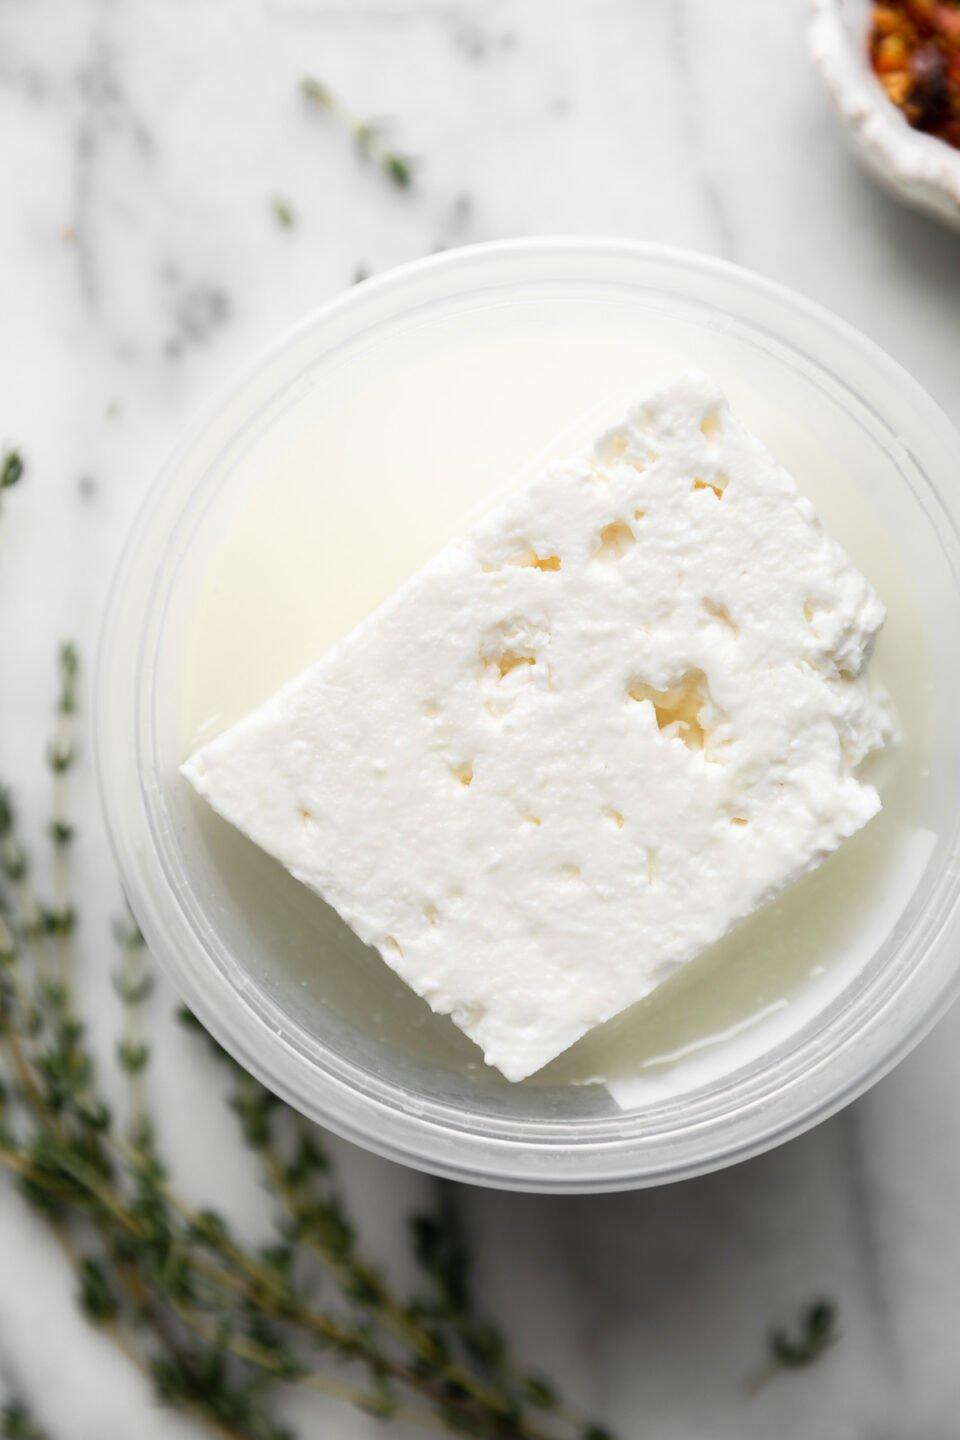 A block of feta cheese in brine rests inside a plastic deli container. The container sits atop a gray and white marble surface. A small pinch bowl filled with crushed red pepper flakes and fresh sprigs of thyme rest alongside the feta.